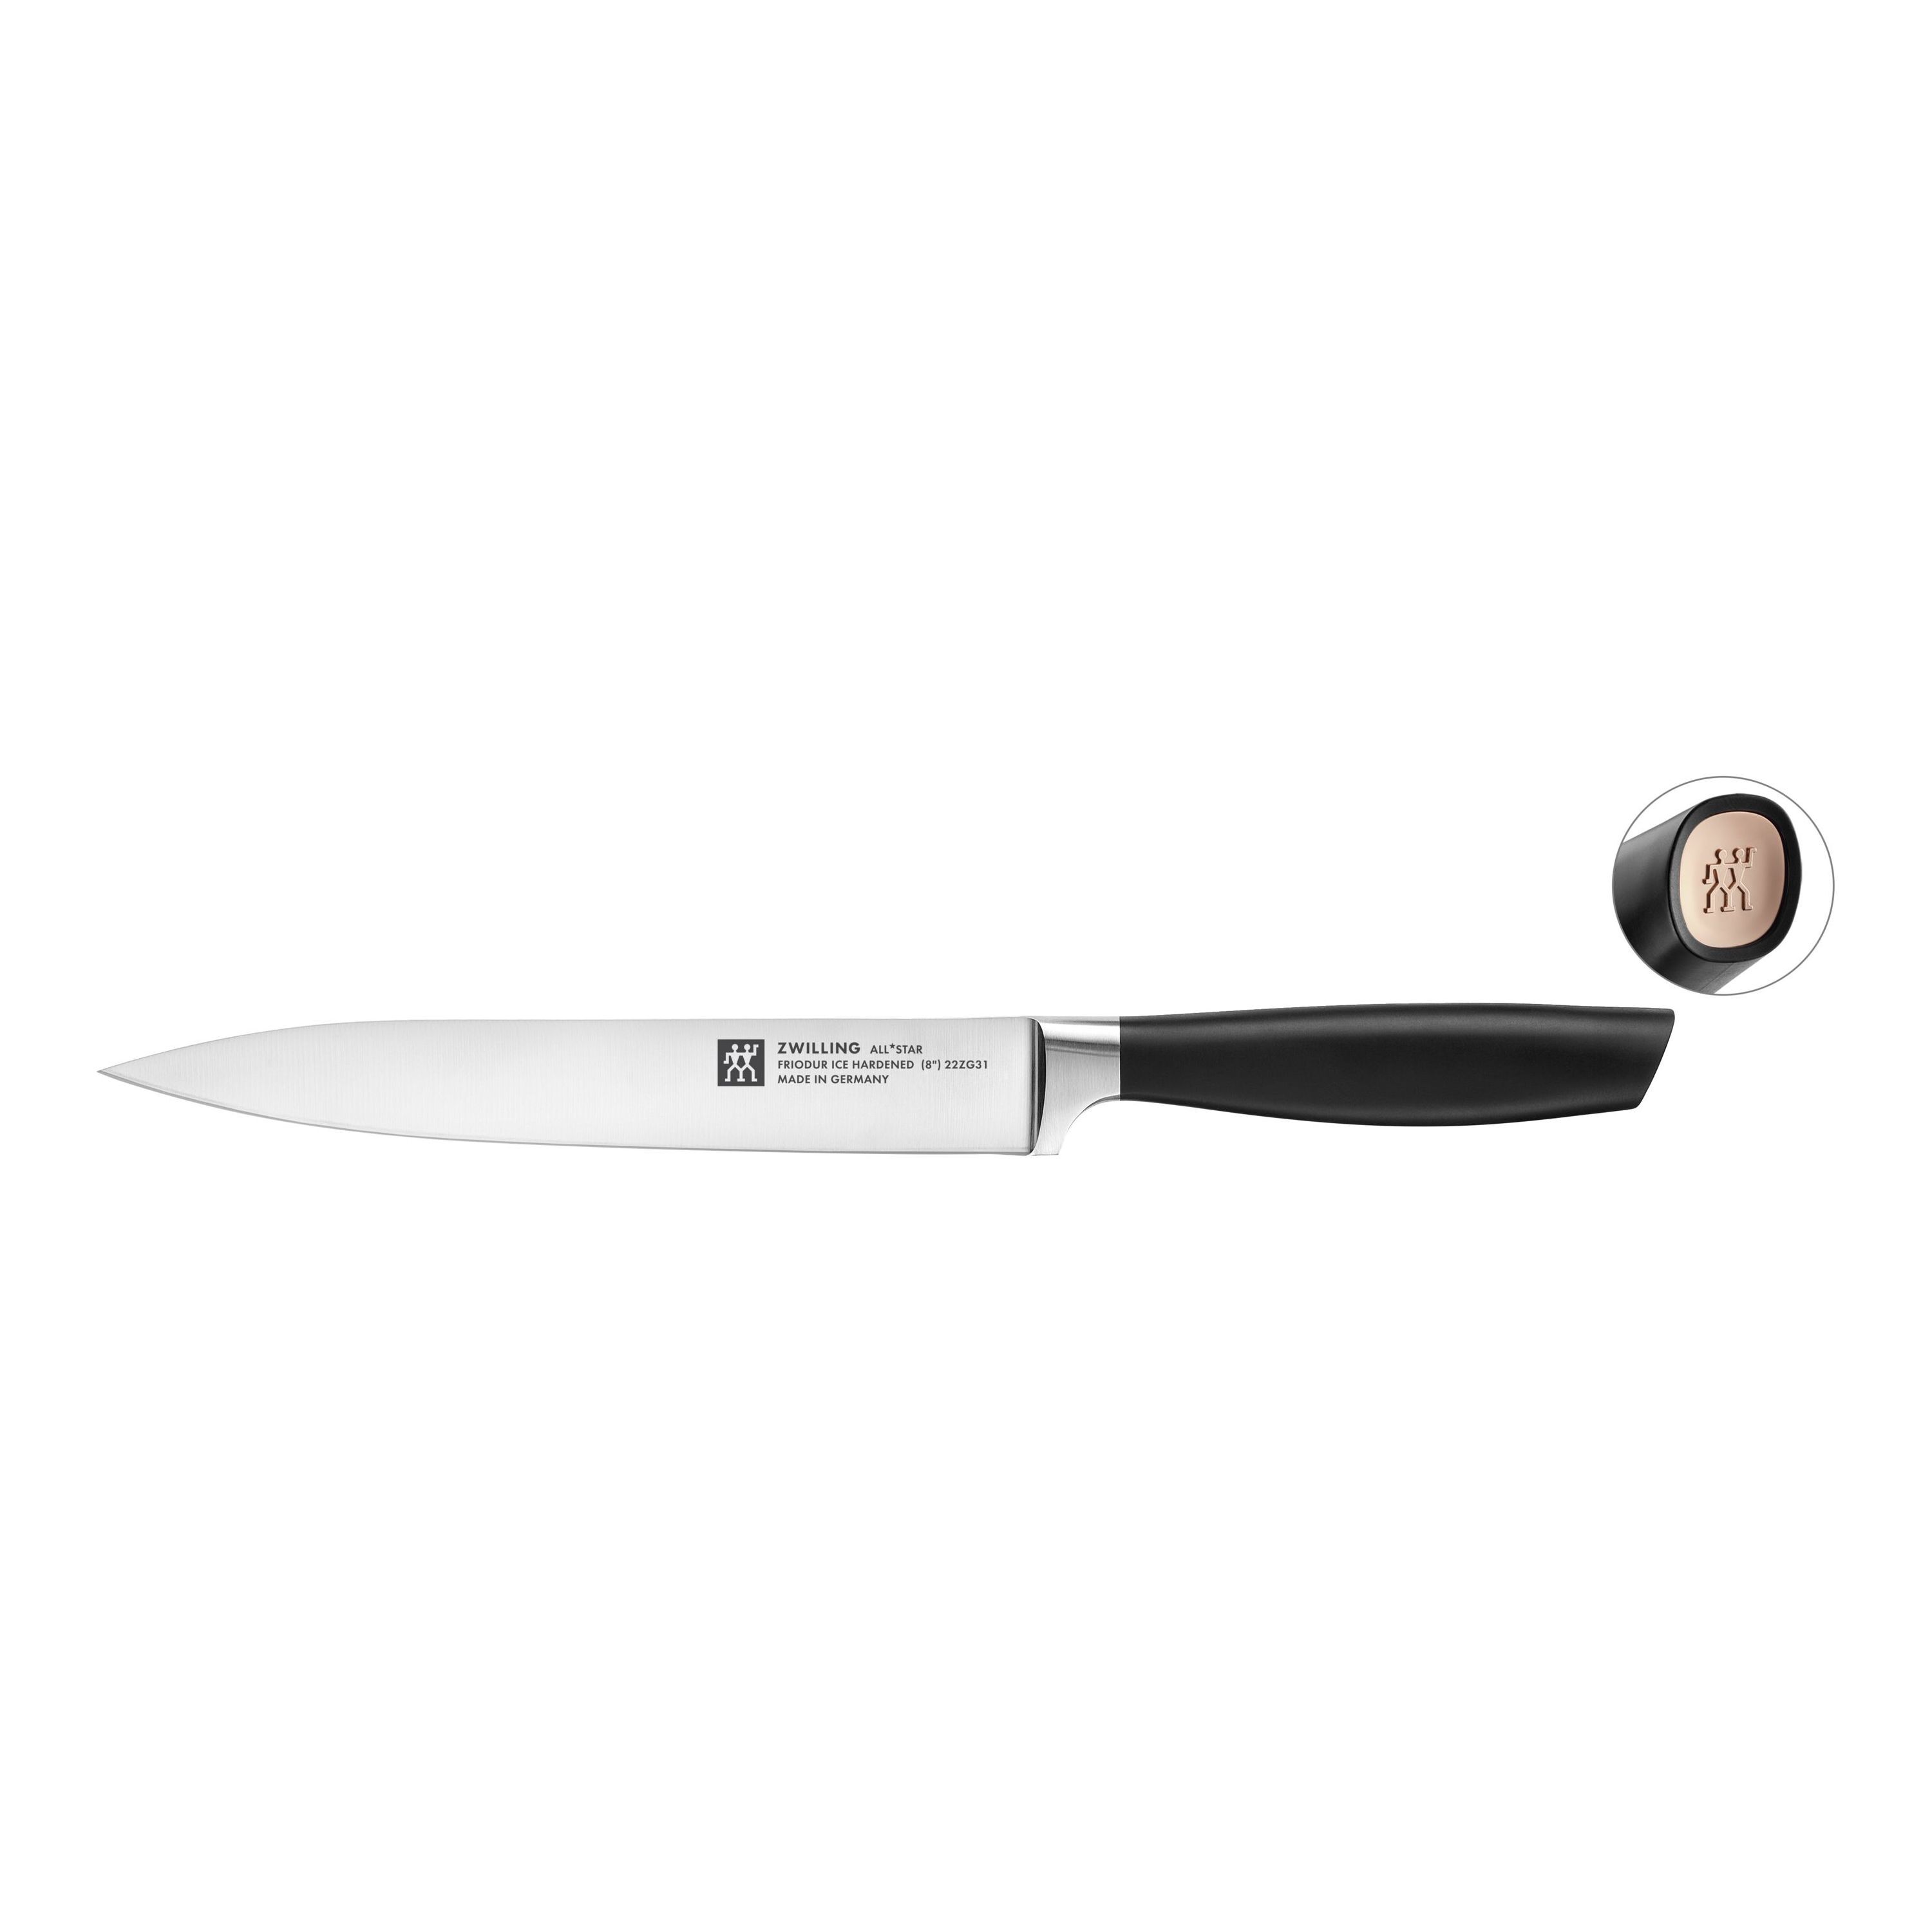 ZWILLING All * Star Couteau à trancher 20 cm, or rose